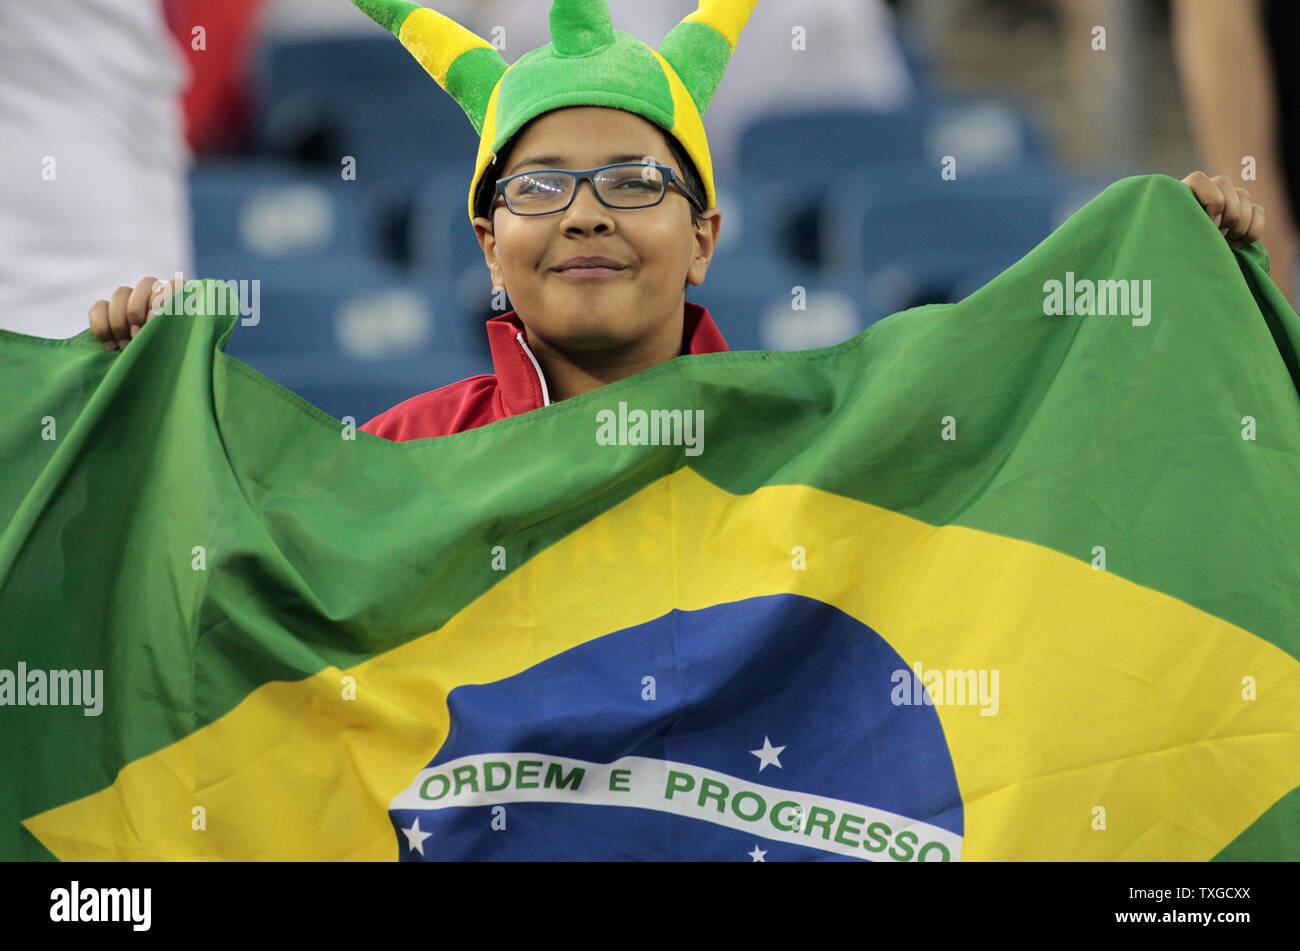 A young Brazil soccer fan waves a Brazilian flag prior to the 2016 Copa America Centenario Group B match against Peru at Gillette Stadium in Foxborough, Massachusetts on June 12, 2016.  Photo by Matthew Healey/UPI Stock Photo